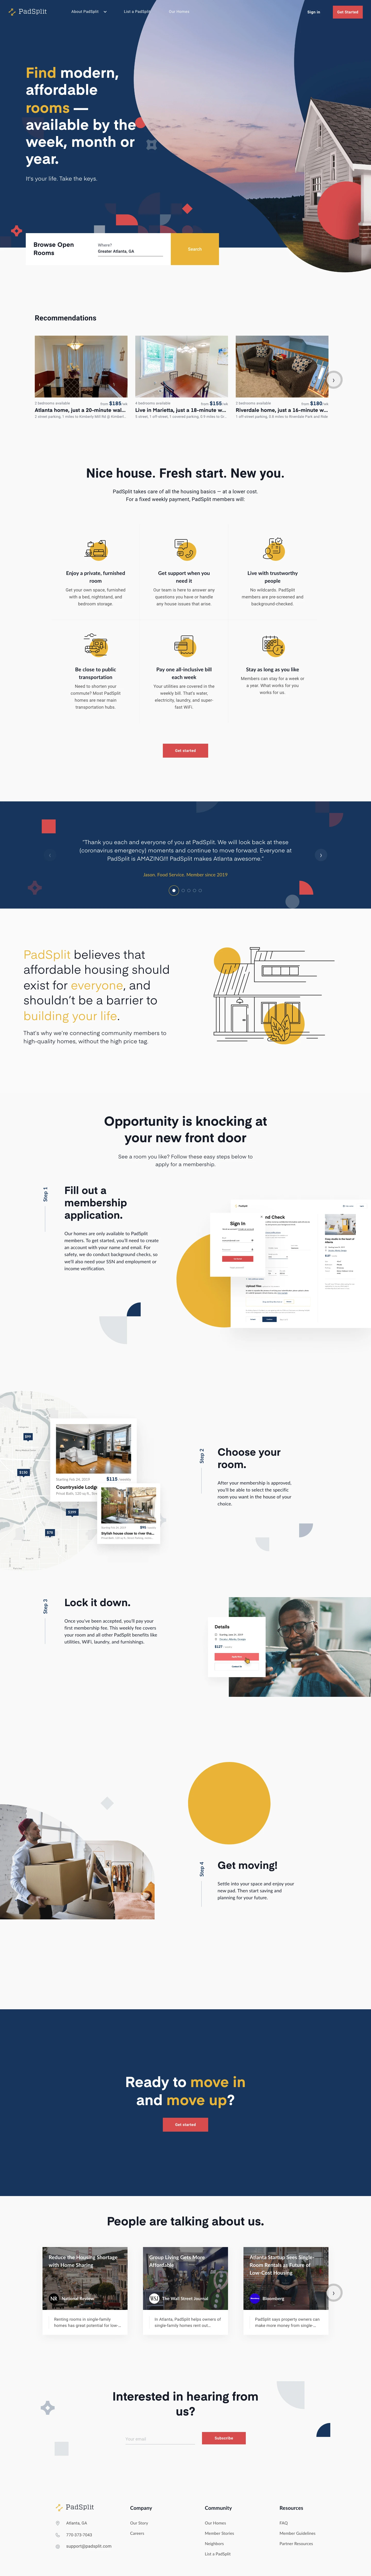 PadSplit Landing Page Example: Find modern, affordable rooms — available by the week, month or year. It's your life. Take the keys.